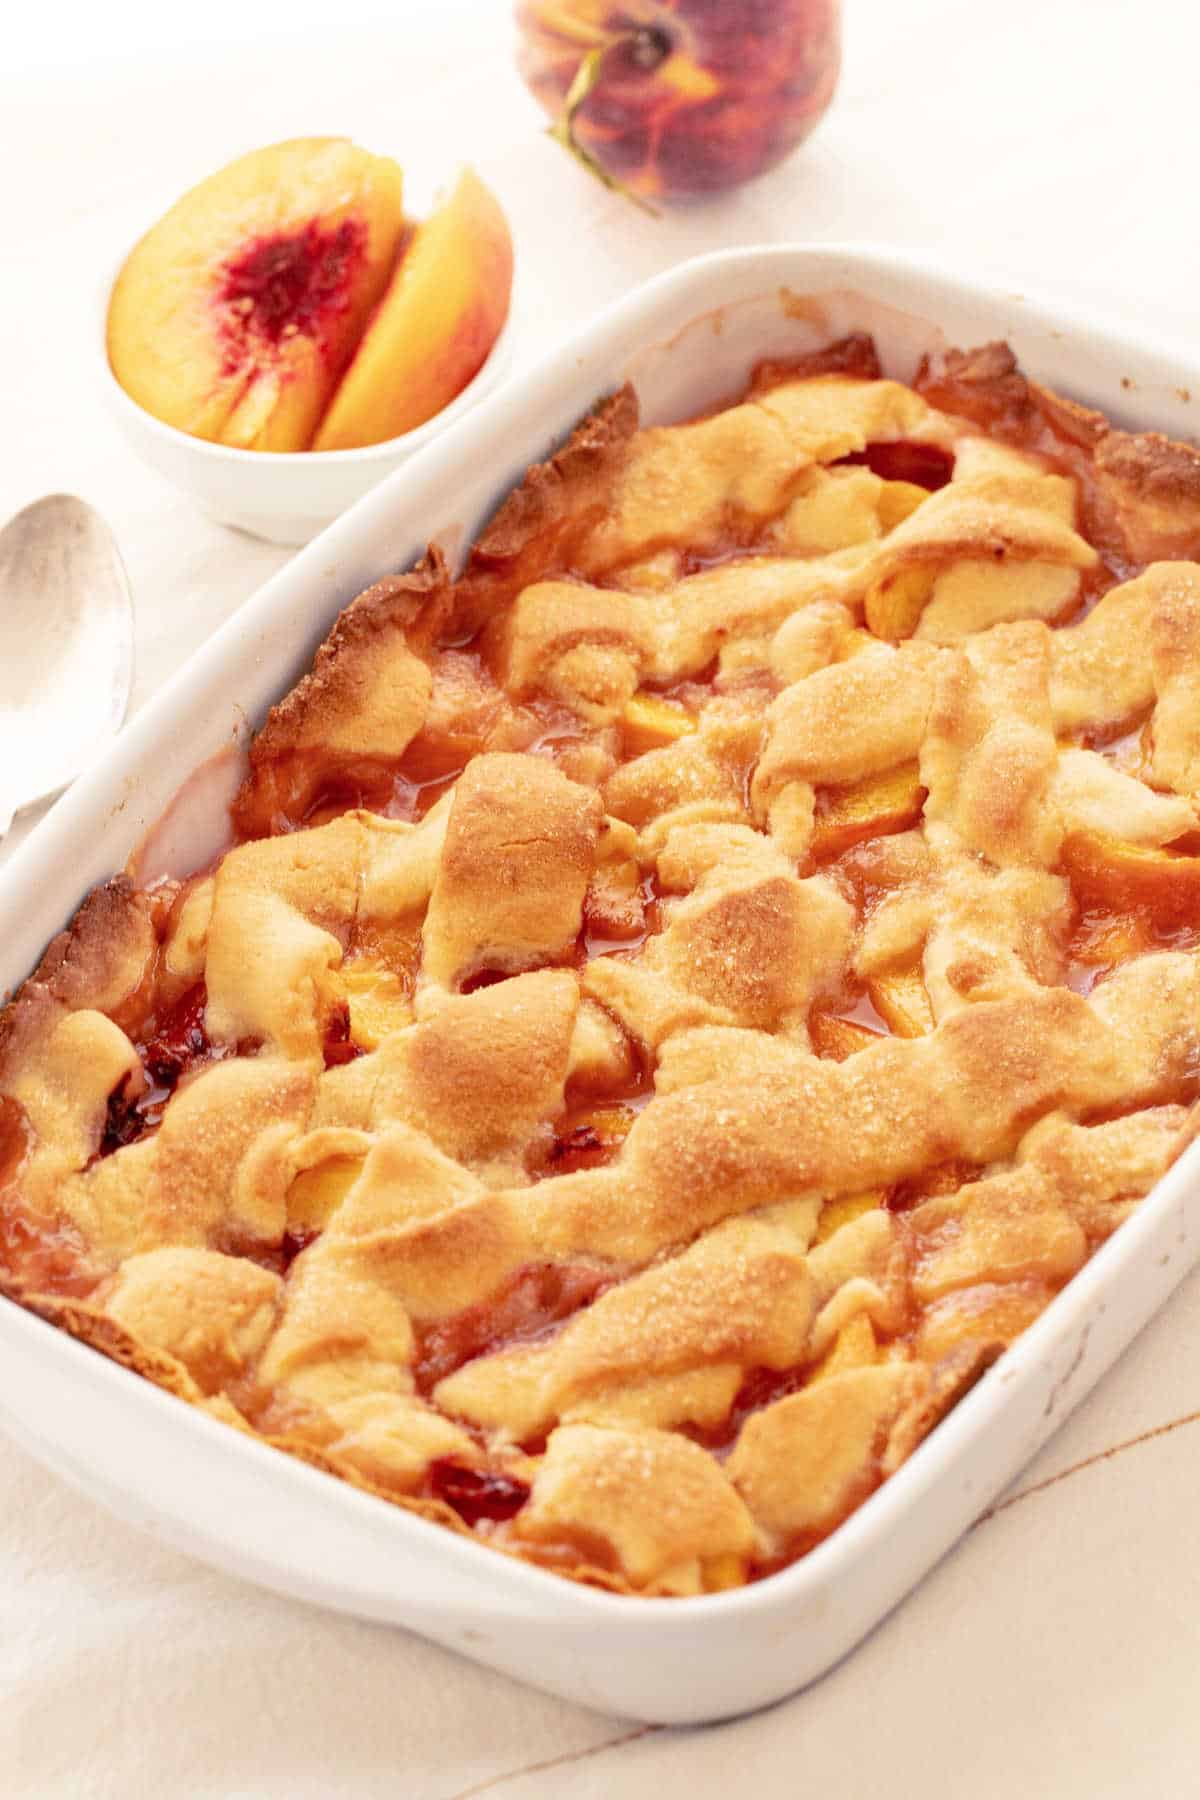 Rectangular dish with pie crust topped peach cobbler, white surface, fresh cut peaches in background.